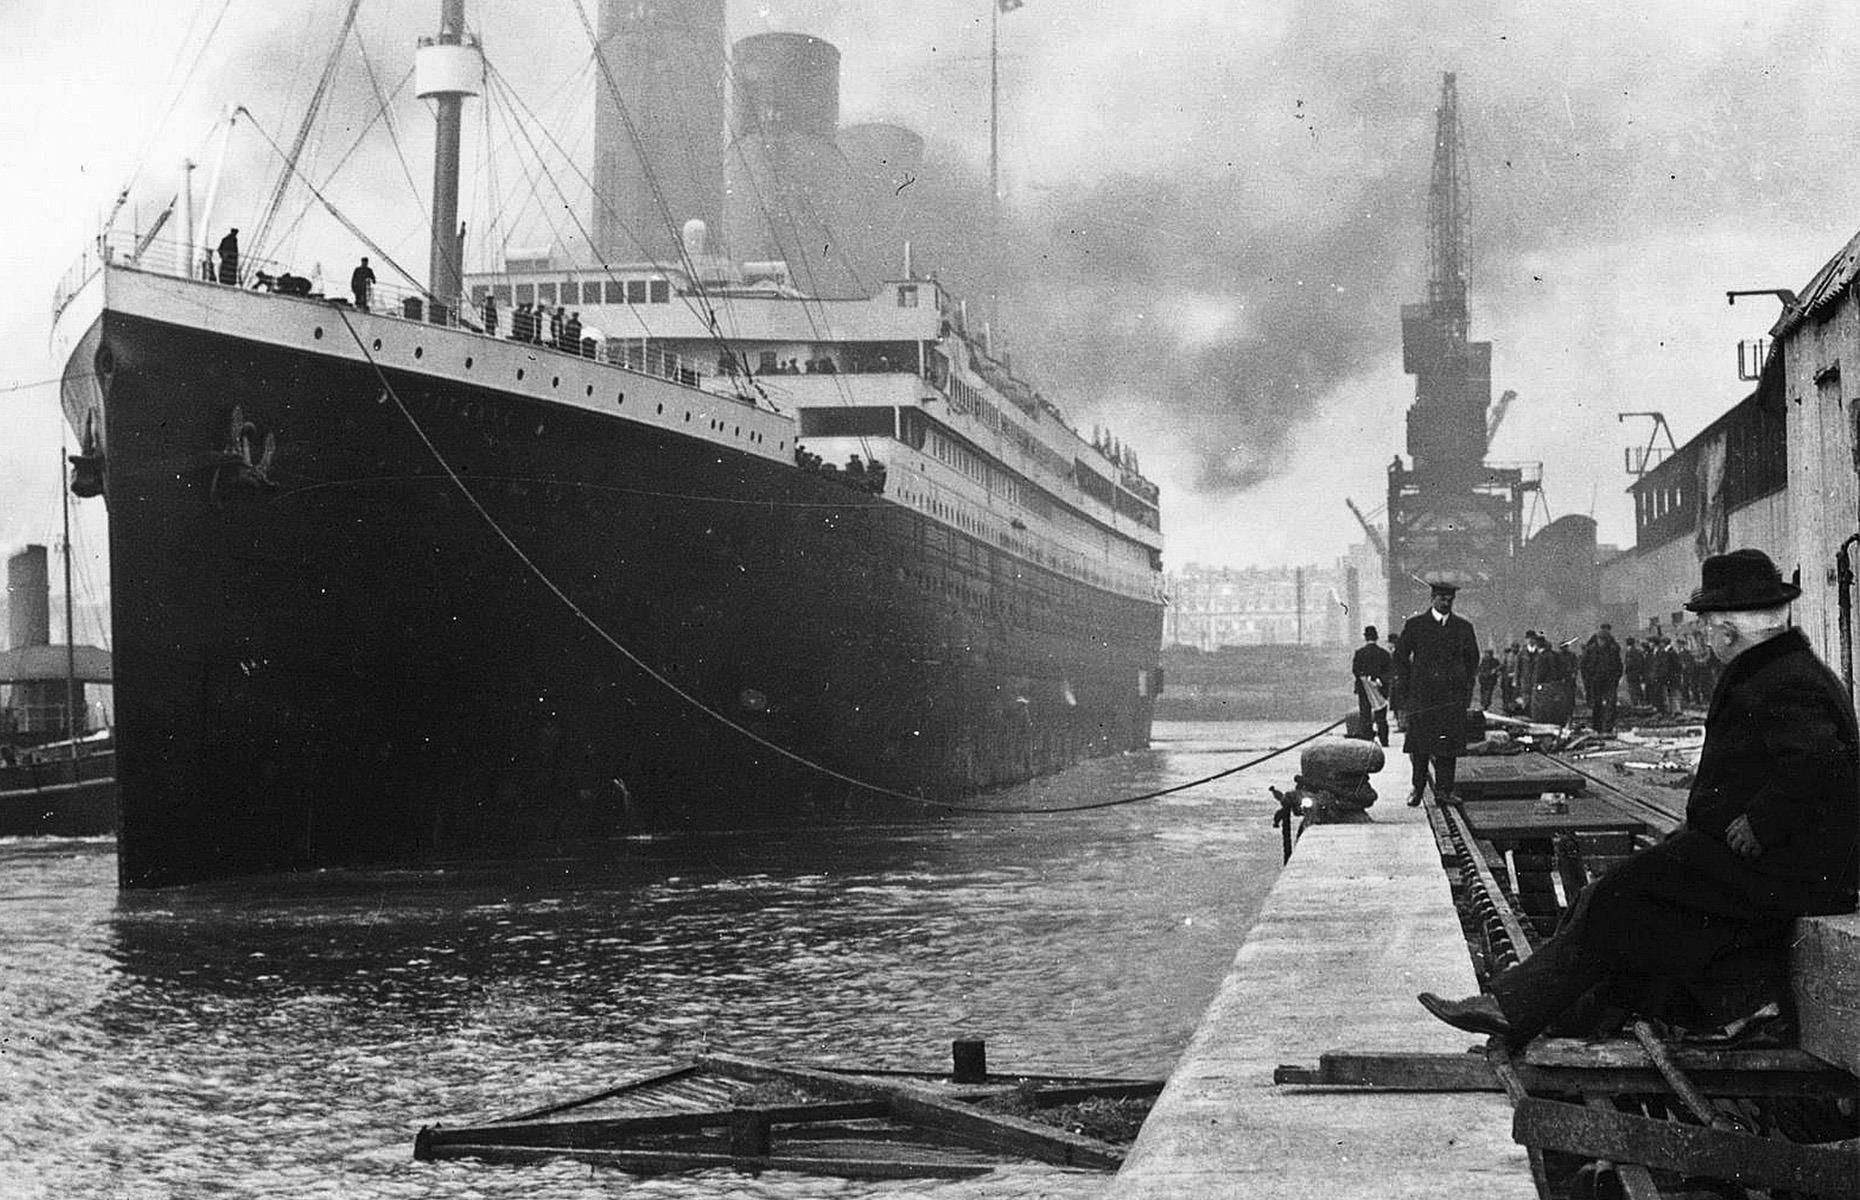 <p>It's been more than 110 years since the ill-fated RMS Titanic hit an iceberg on her maiden voyage, falling to the Atlantic seabed where the hull still rests today. More than 1,500 people died on 14 April, 1912, making it one of the most tragic maritime disasters of all time. Here, with a vintage menu selling for a record £84,000 (around $100,000), we shed light on what life – and the food – was like onboard the most famous liner in history.</p>  <p><strong>Following the recent auction of the Titanic's only known surviving first-class dinner menu, from 11 April, click or scroll on to discover what it reveals about the culinary offering and day-to-day life onboard the ship.</strong></p>